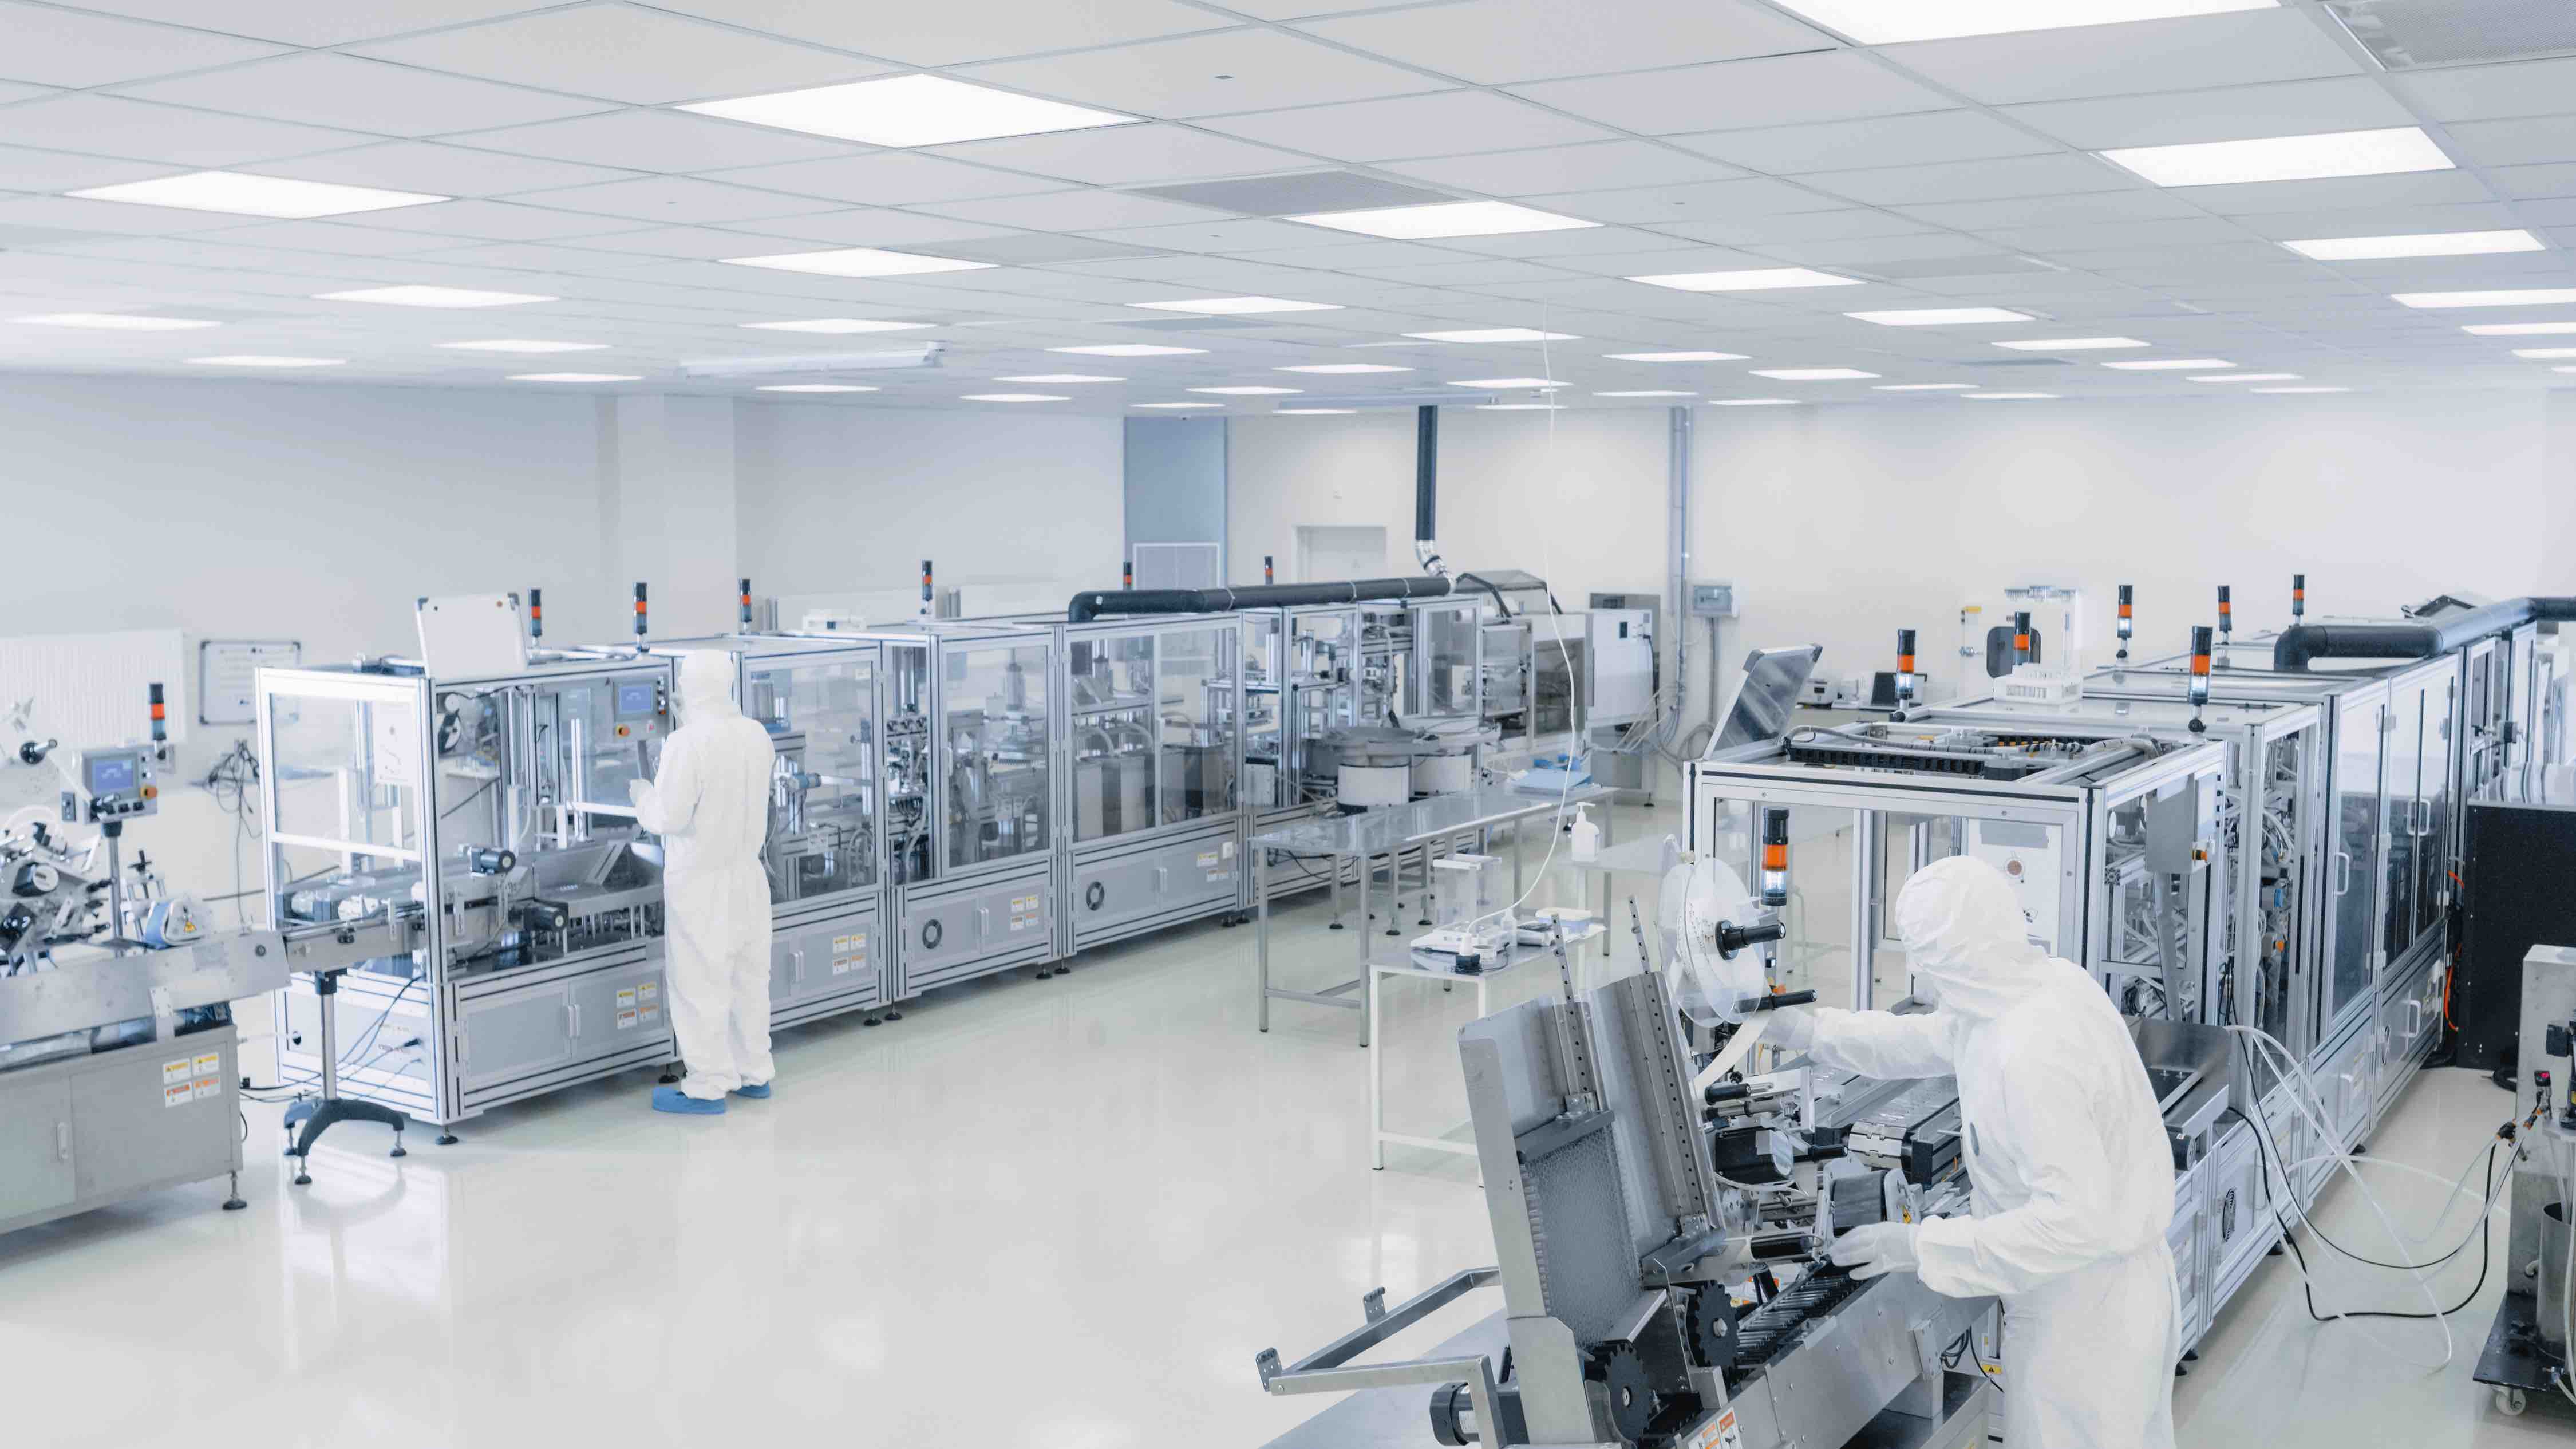 The importance of correct lubrication for cleanroom contamination control